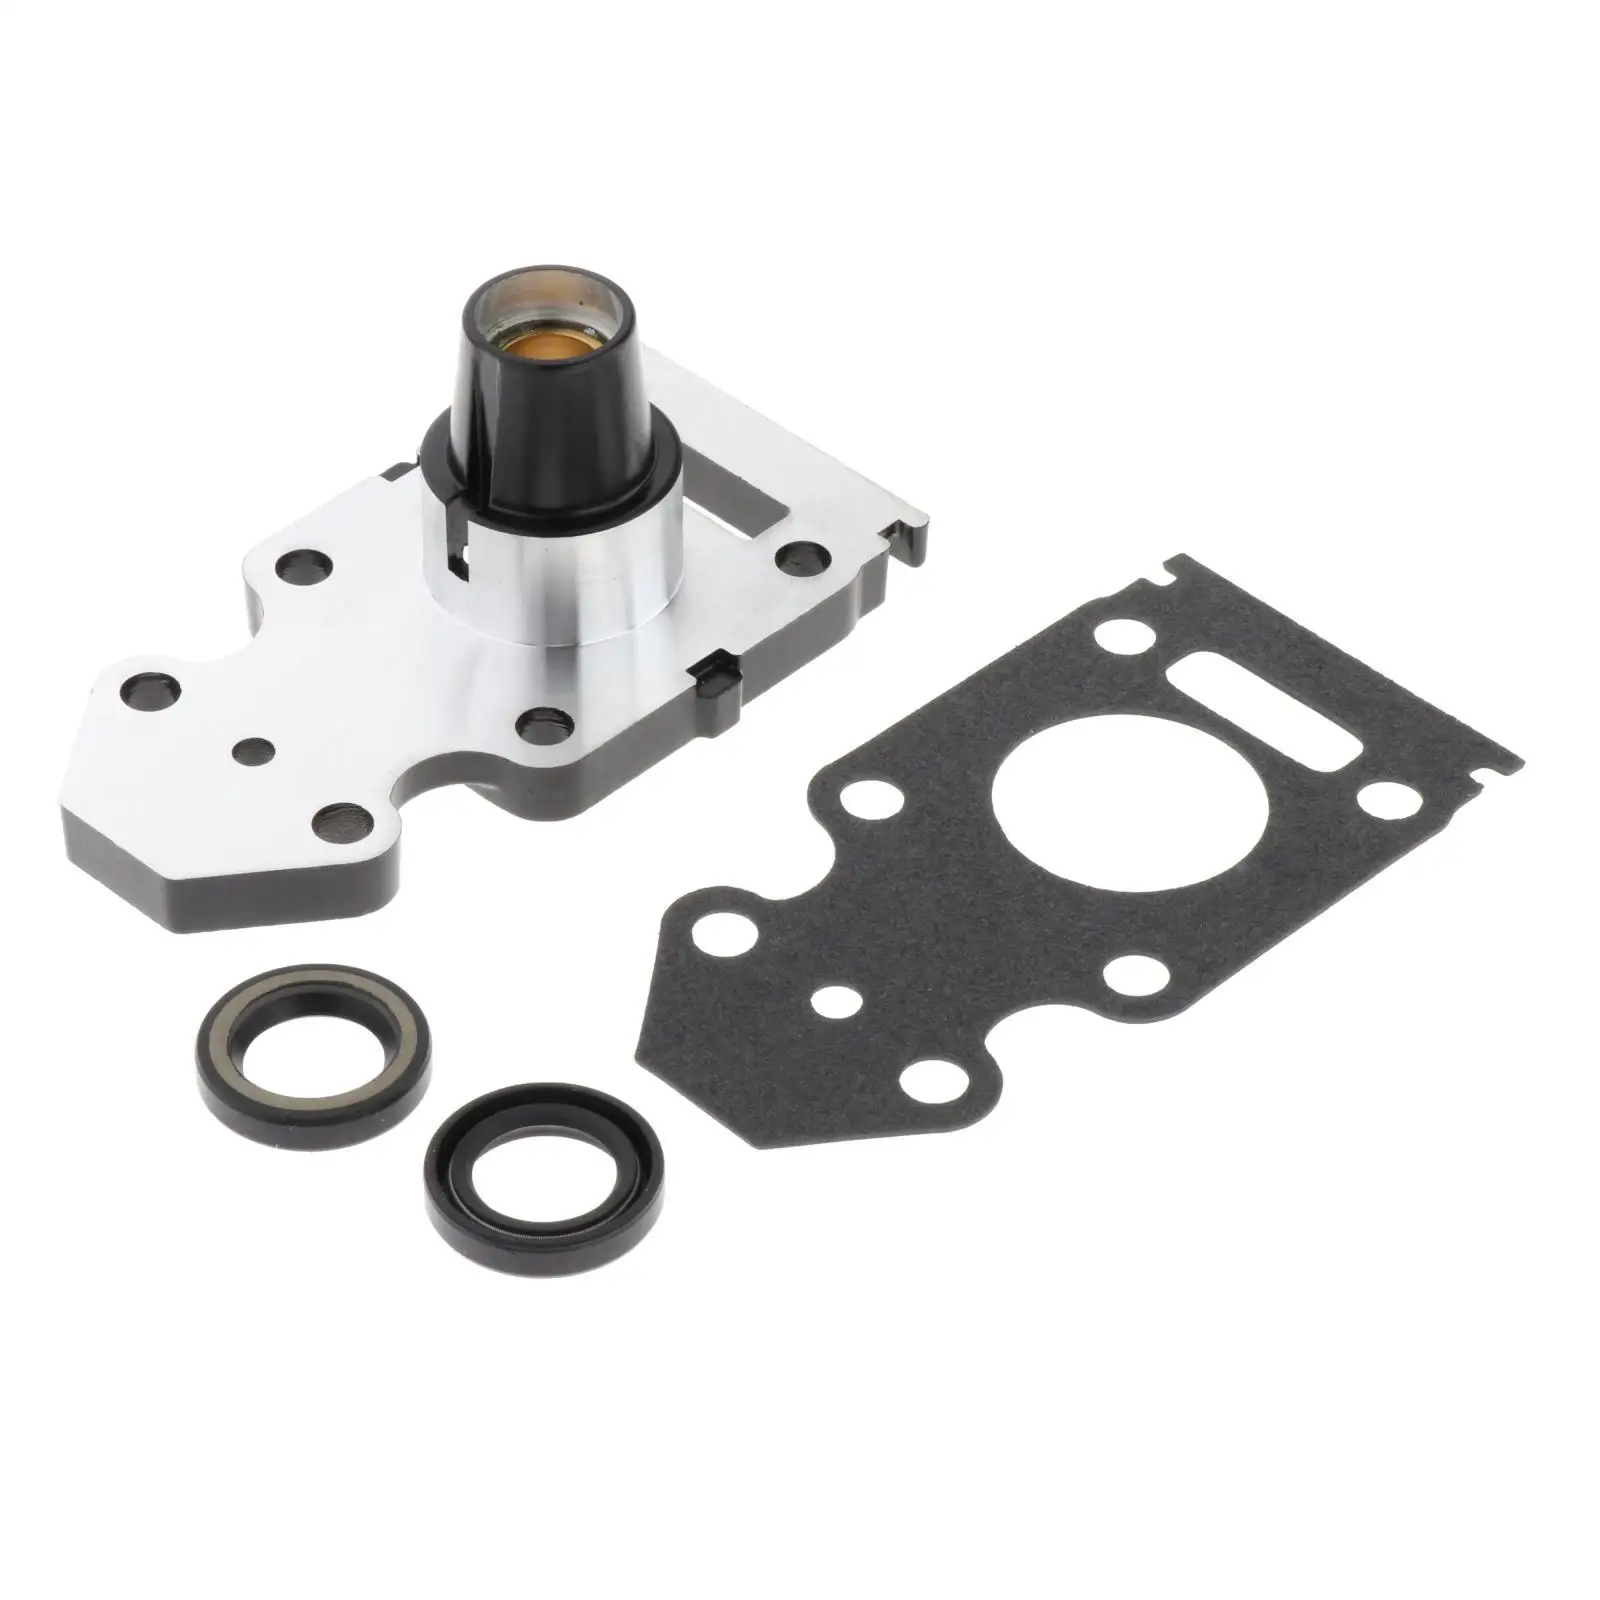 Housing Kit, Boat 3V-45331-00-5000  Outboard 9.15 Stroke for  Replace